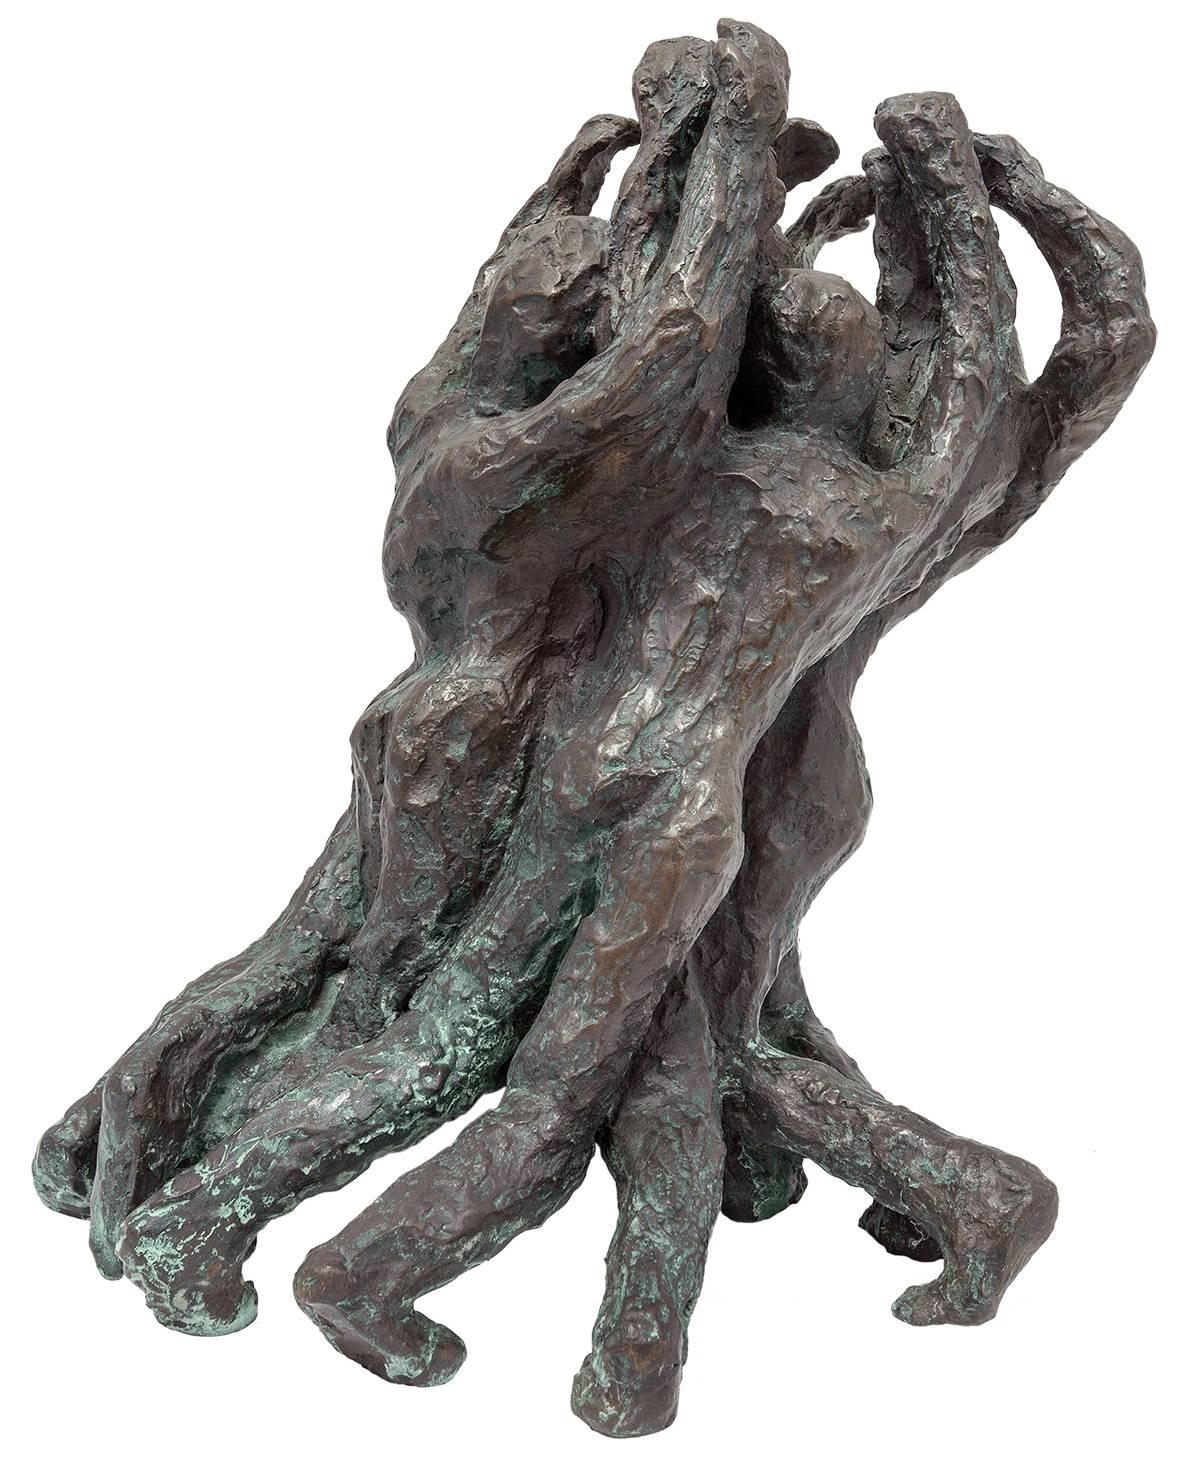 Unknown Figurative Sculpture - Judaica Expressionist Bronze Sculpture "Freedom and Victory" Holocaust Memorial